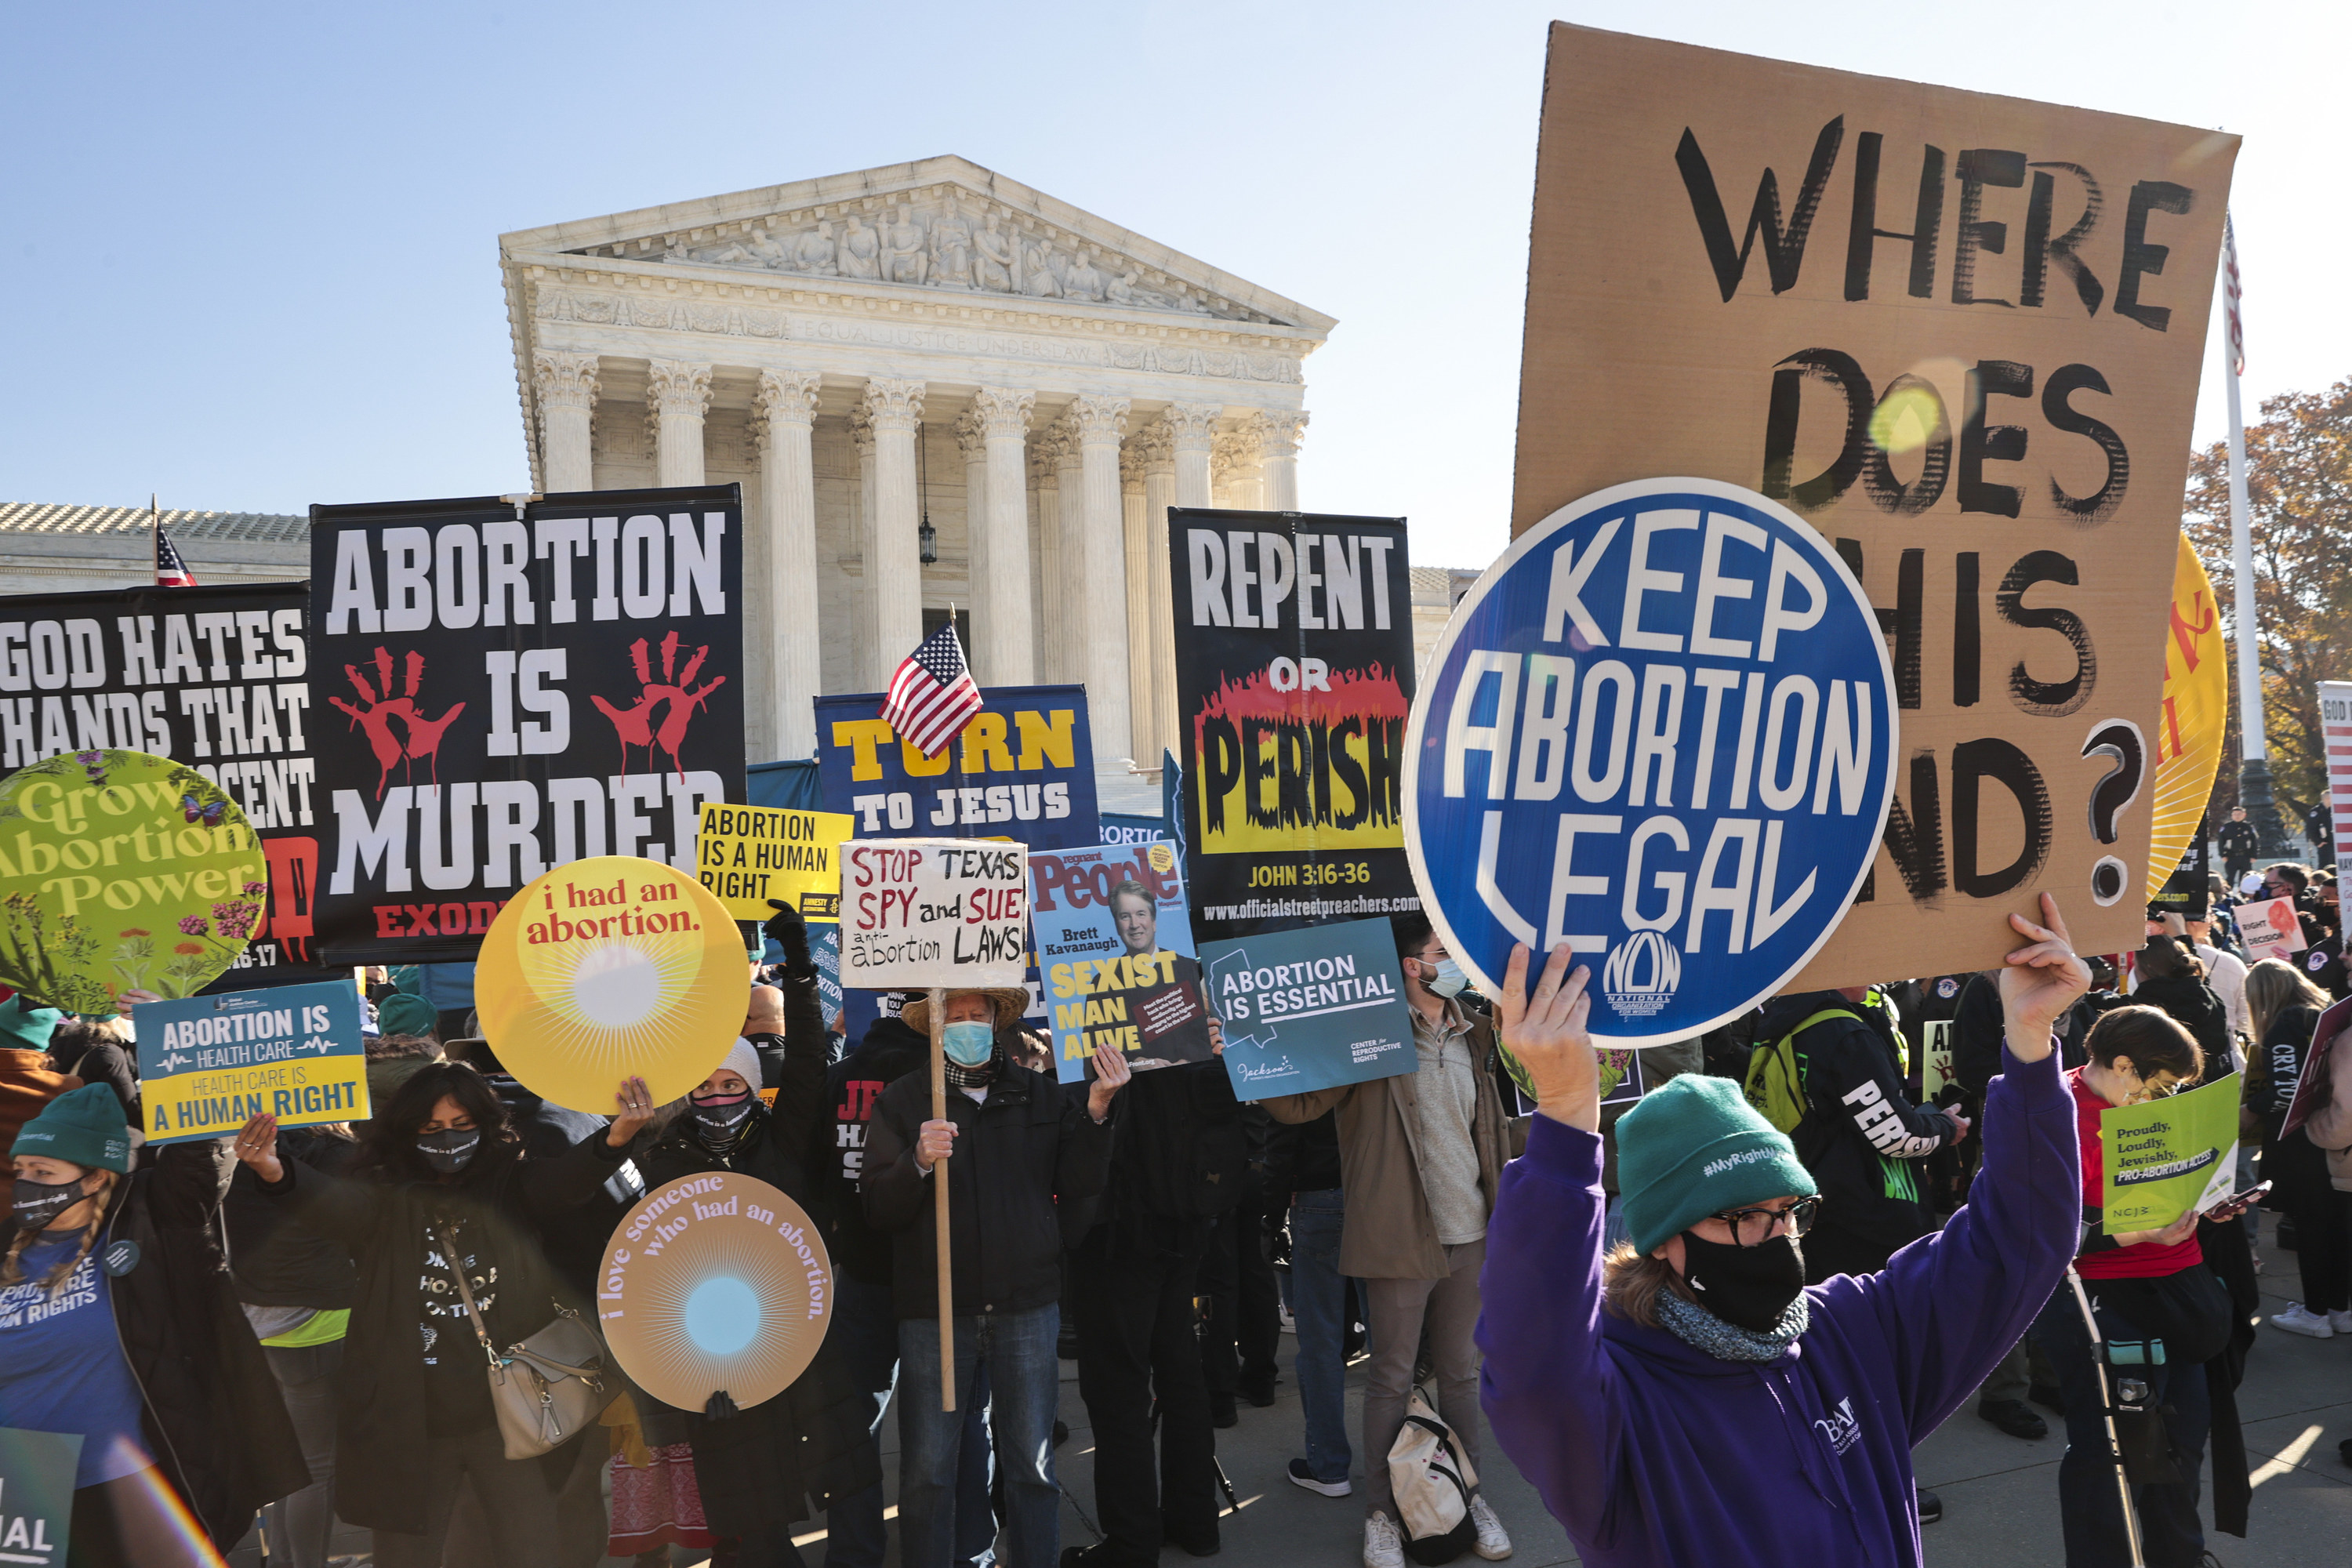 People protesting the overturning of Roe v. Wade outside of the Supreme Court